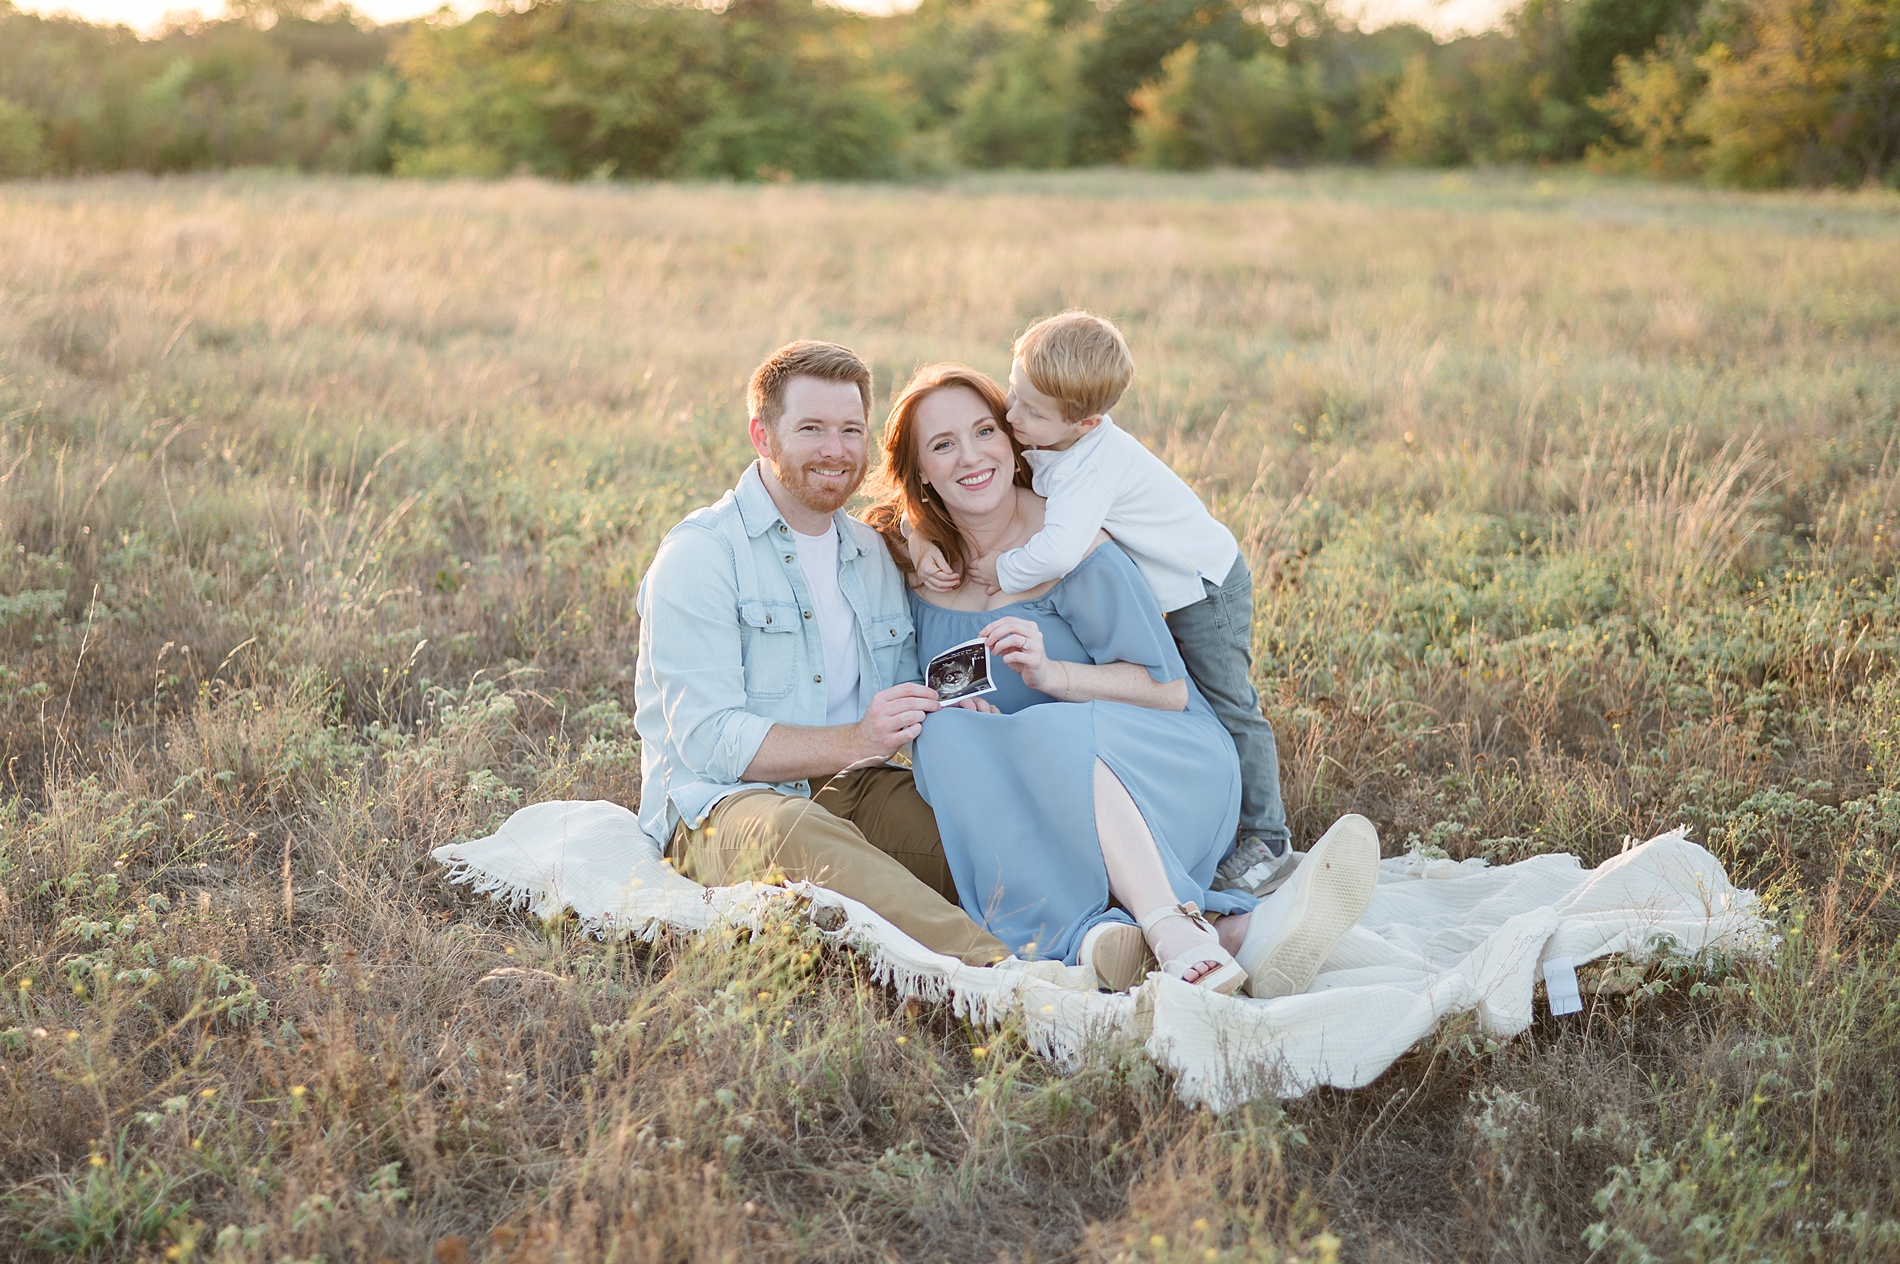 family snuggling at pregnancy announcement photoshoot by Dallas maternity photographer taken by Lindsey Dutton Photography, a Dallas maternity photographer
